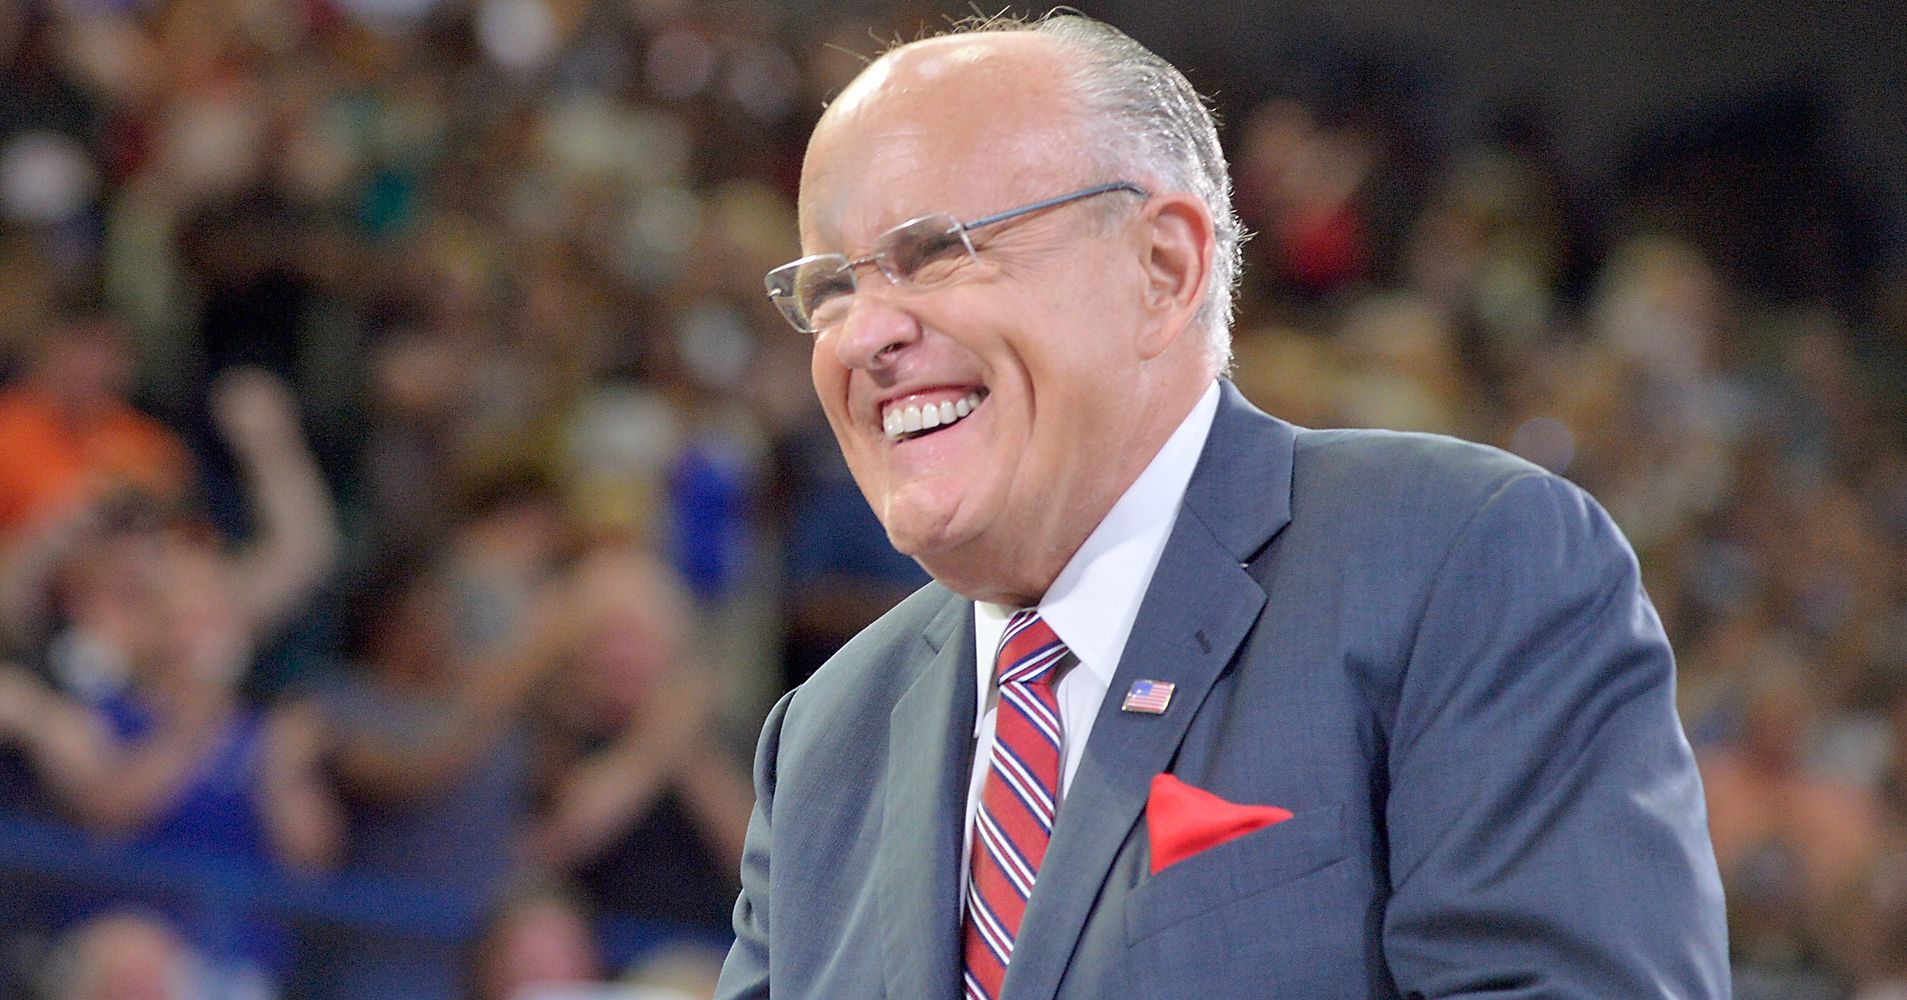 Rudy Giuliani Claims Online Videos Show Hillary Clinton Is Unhealthy | HuffPost